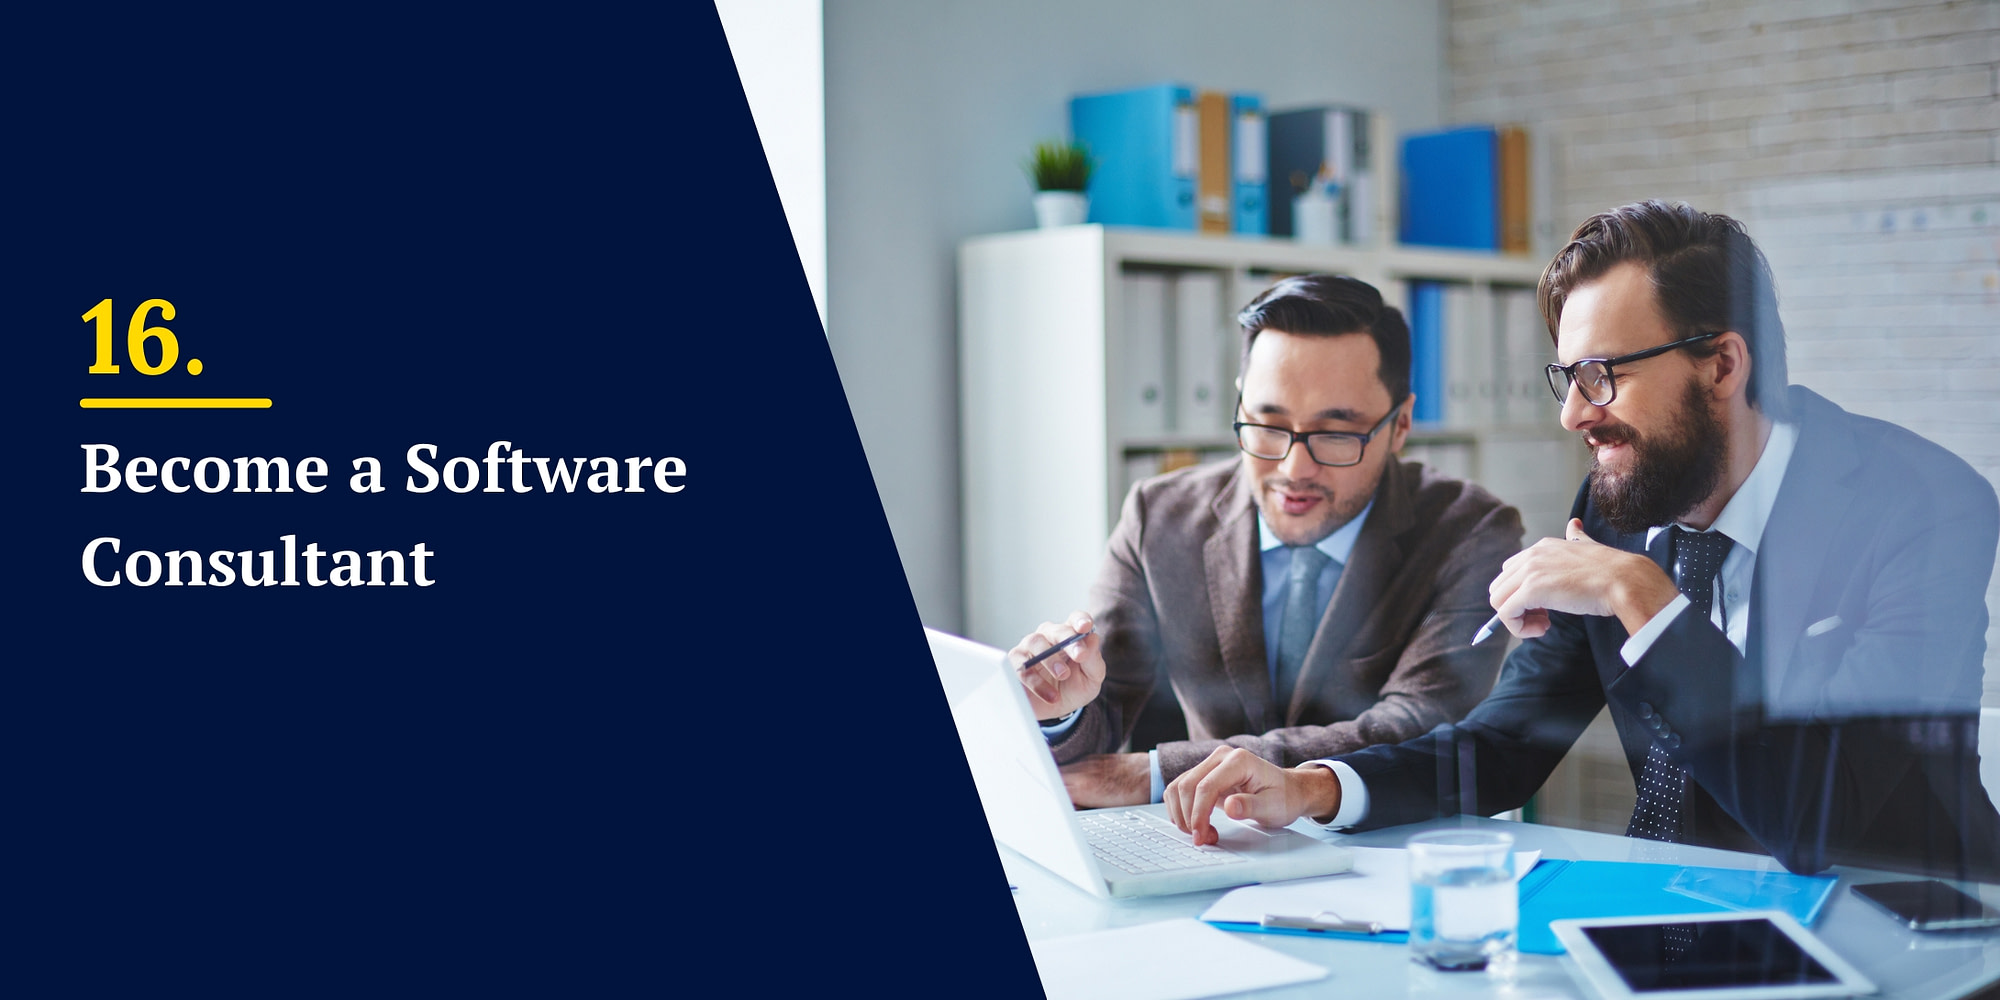 Become a Software Consultant